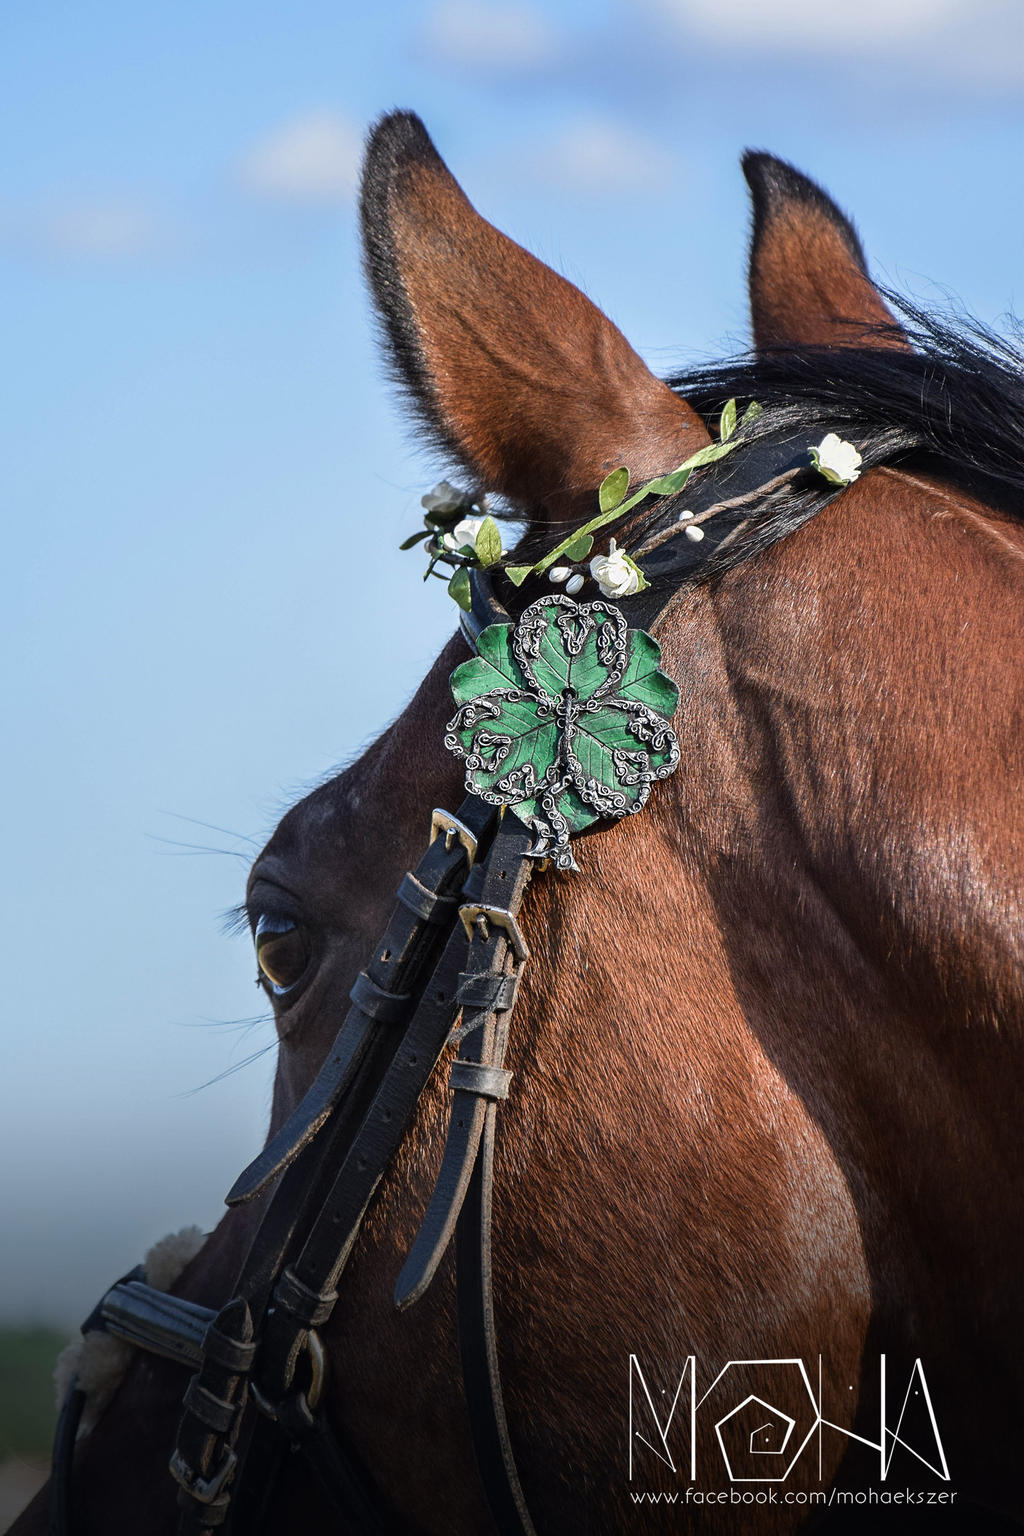 Six-leaf clover bridle ornament - (c)Moha by Moha-jewelry on